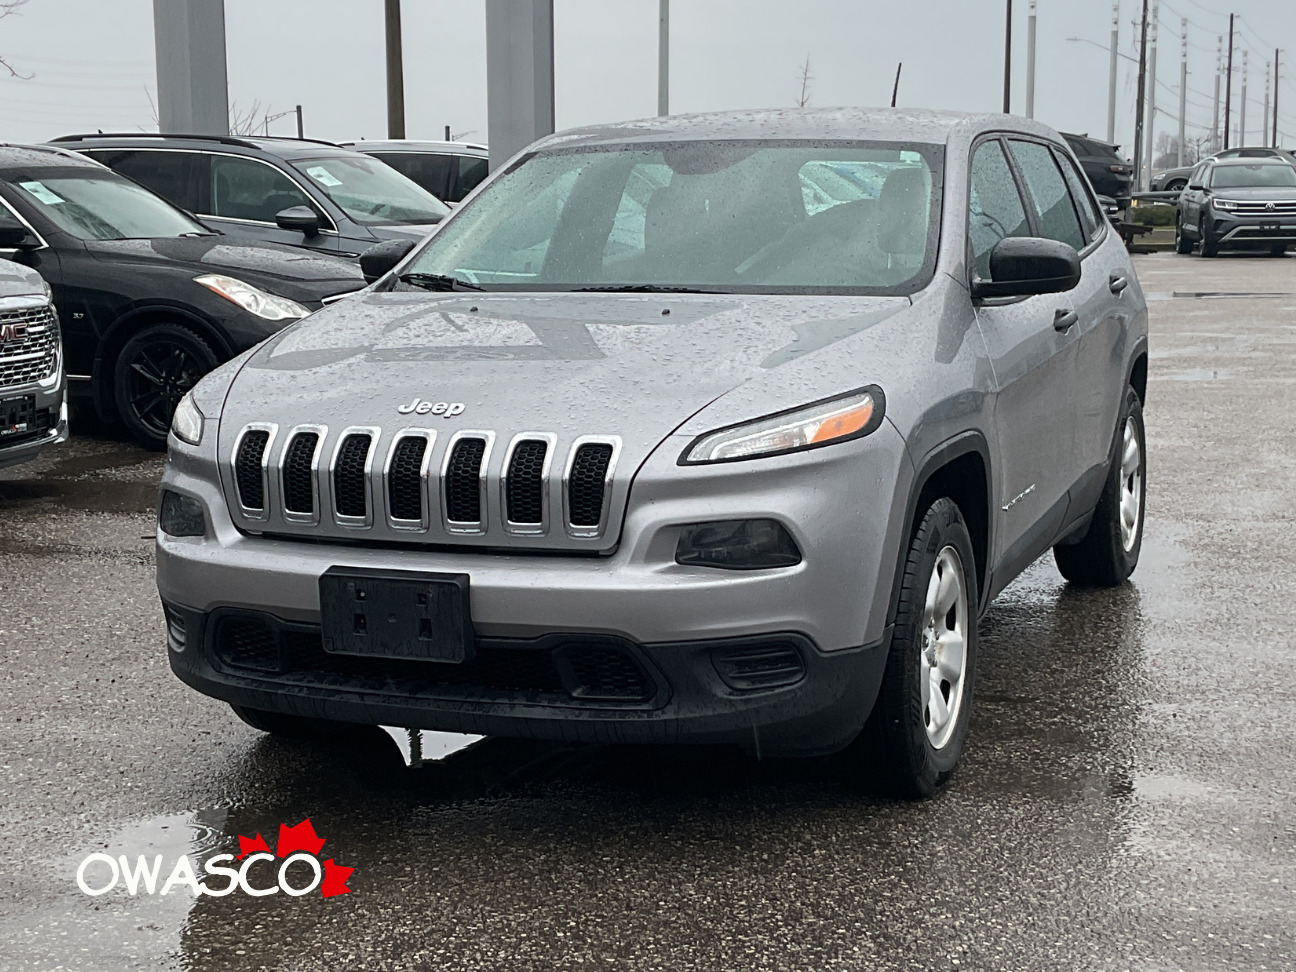 2017 Jeep Cherokee 2.4L Excellent Shape! New Front and Rear Brakes!